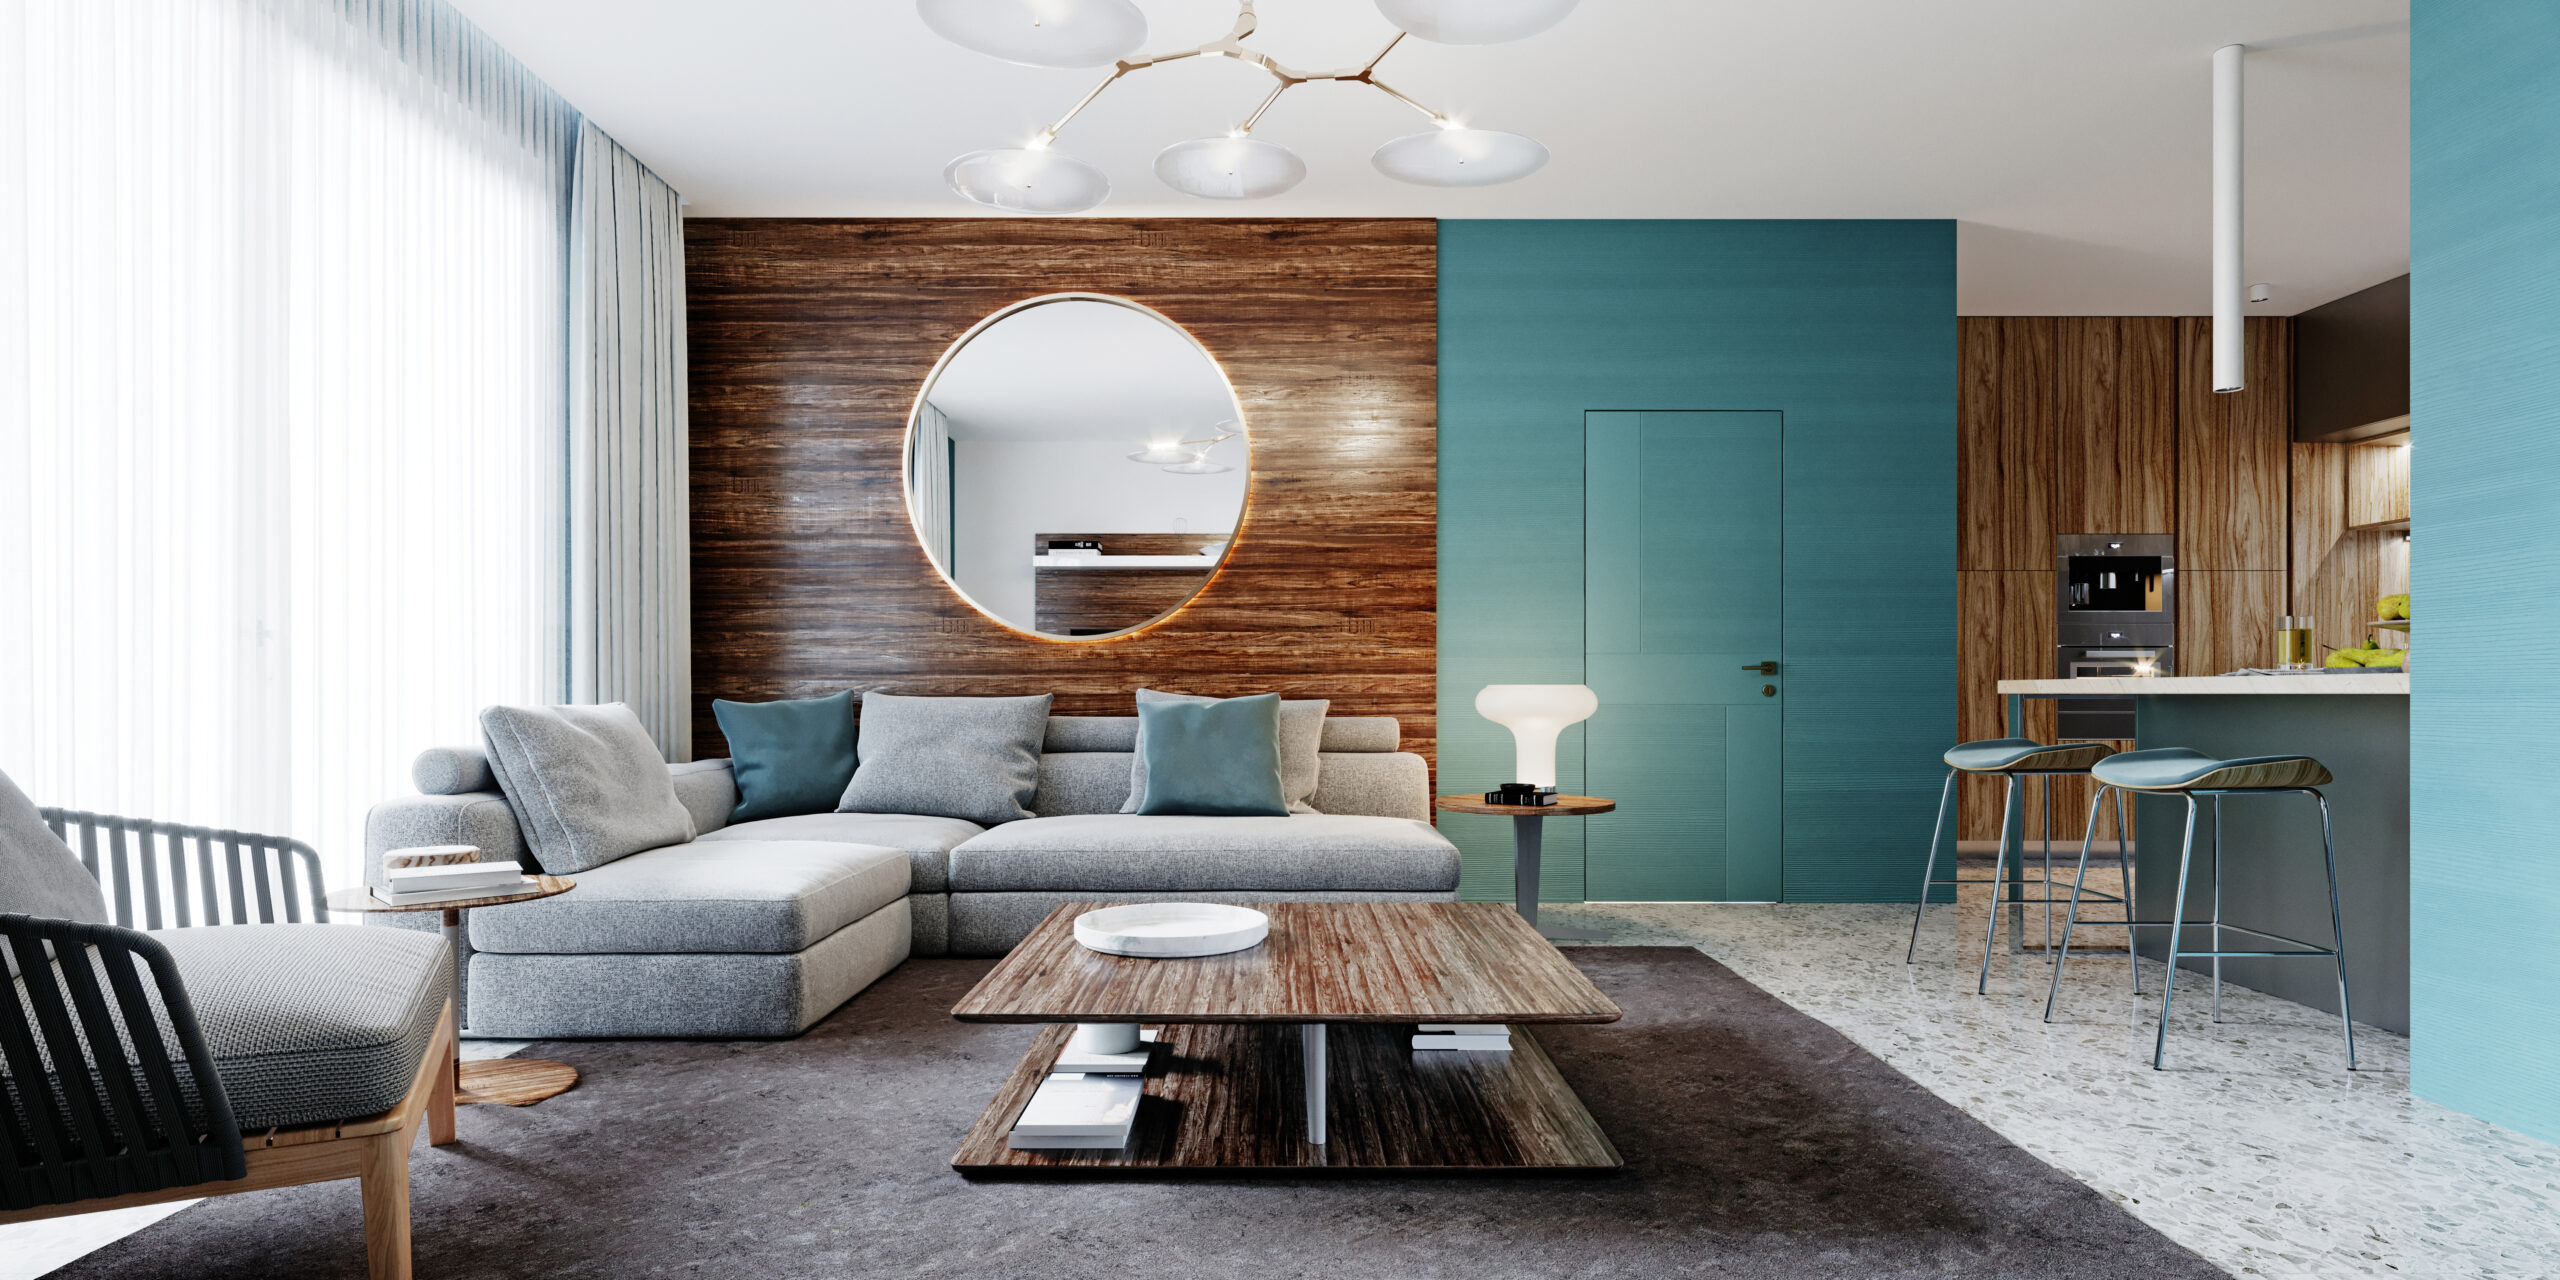 Contemporary living room studio, aquamarine walls with wooden panels and a round mirror, a white corner sofa and a black cabinet with TV.